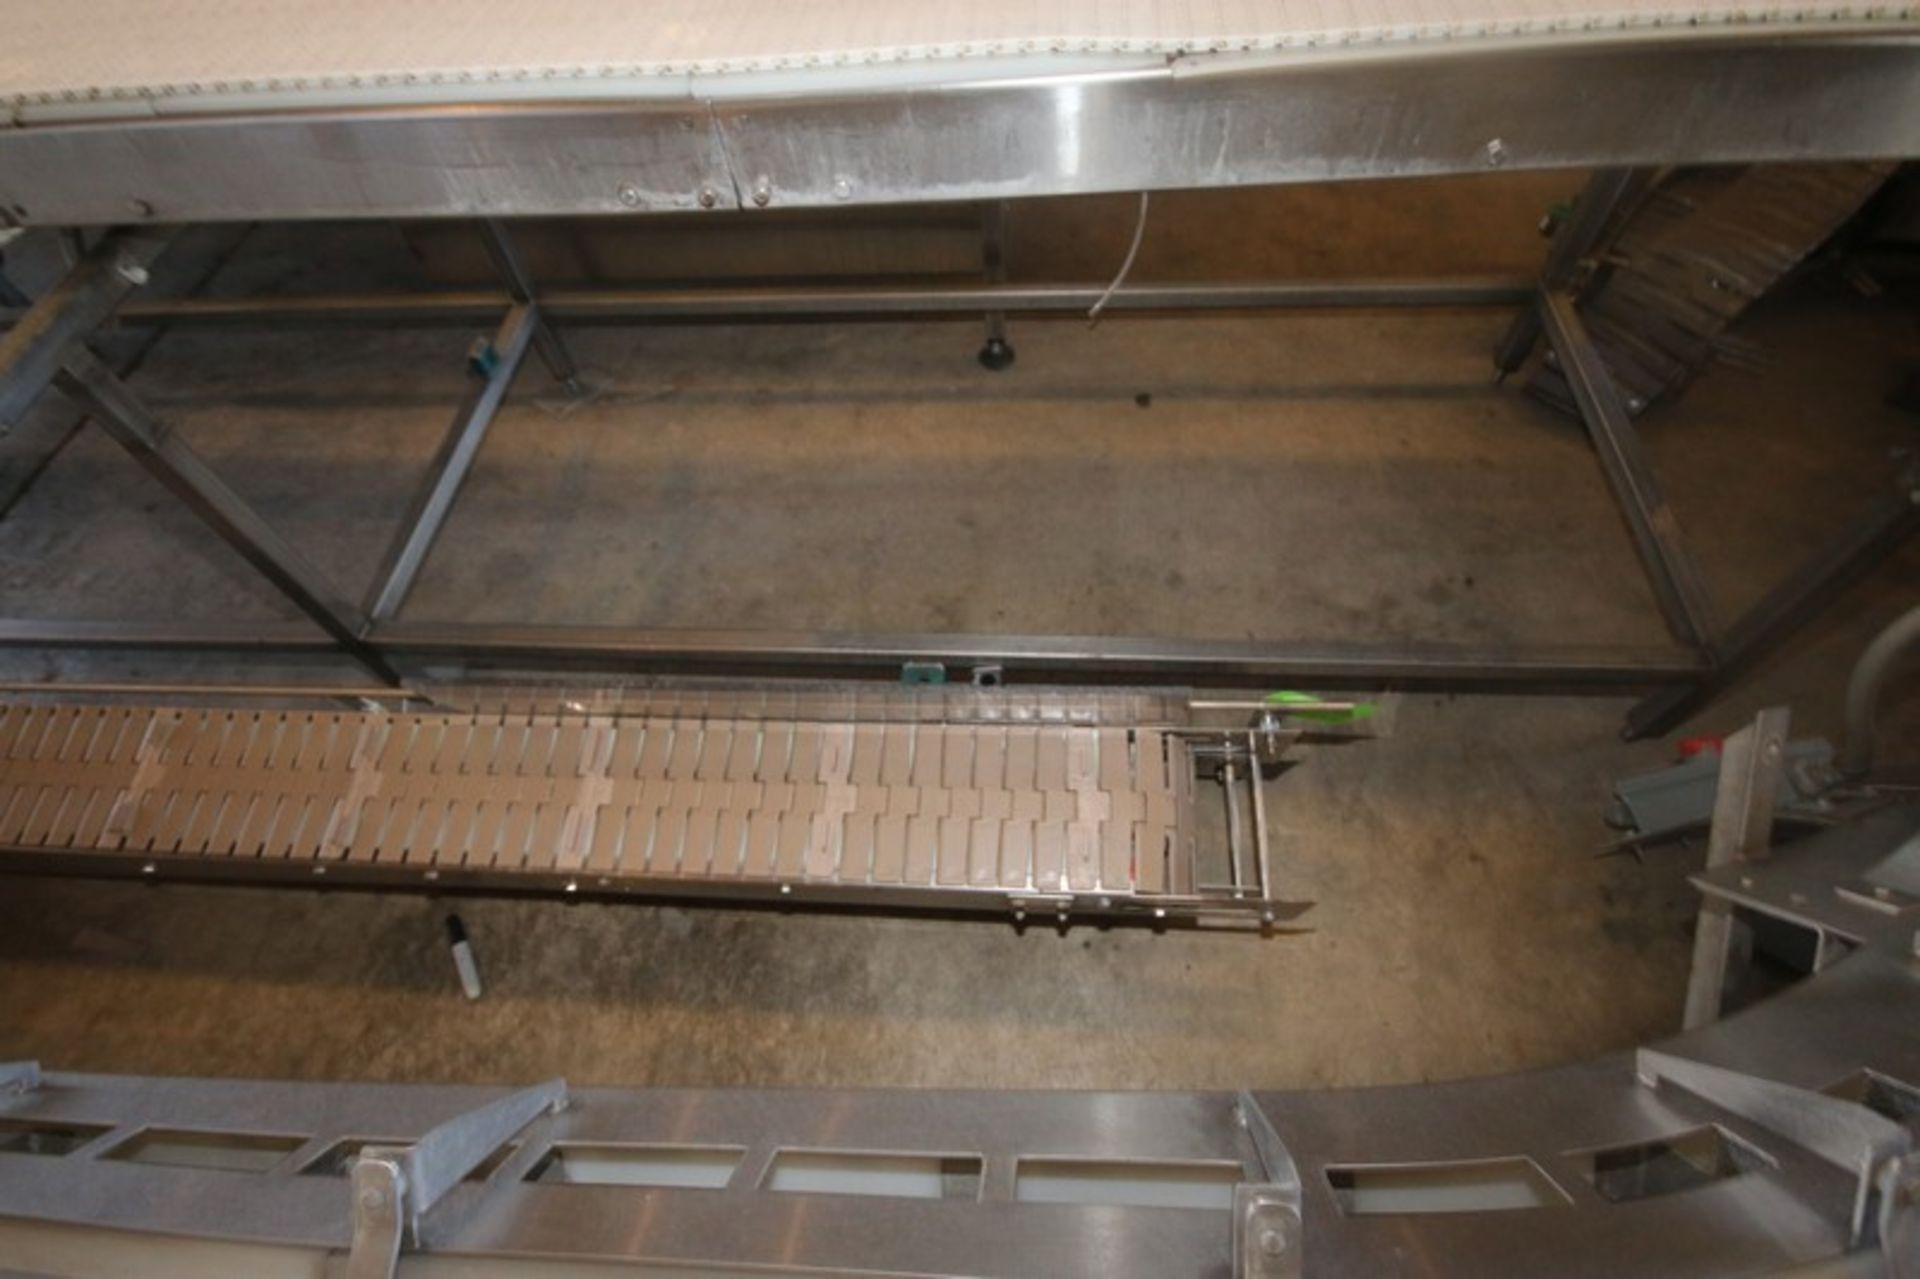 Straight Section of Flighted S/S Conveyor, with Flights, Aprox. 12" W Flights, Overall Length Aprox. - Image 2 of 3